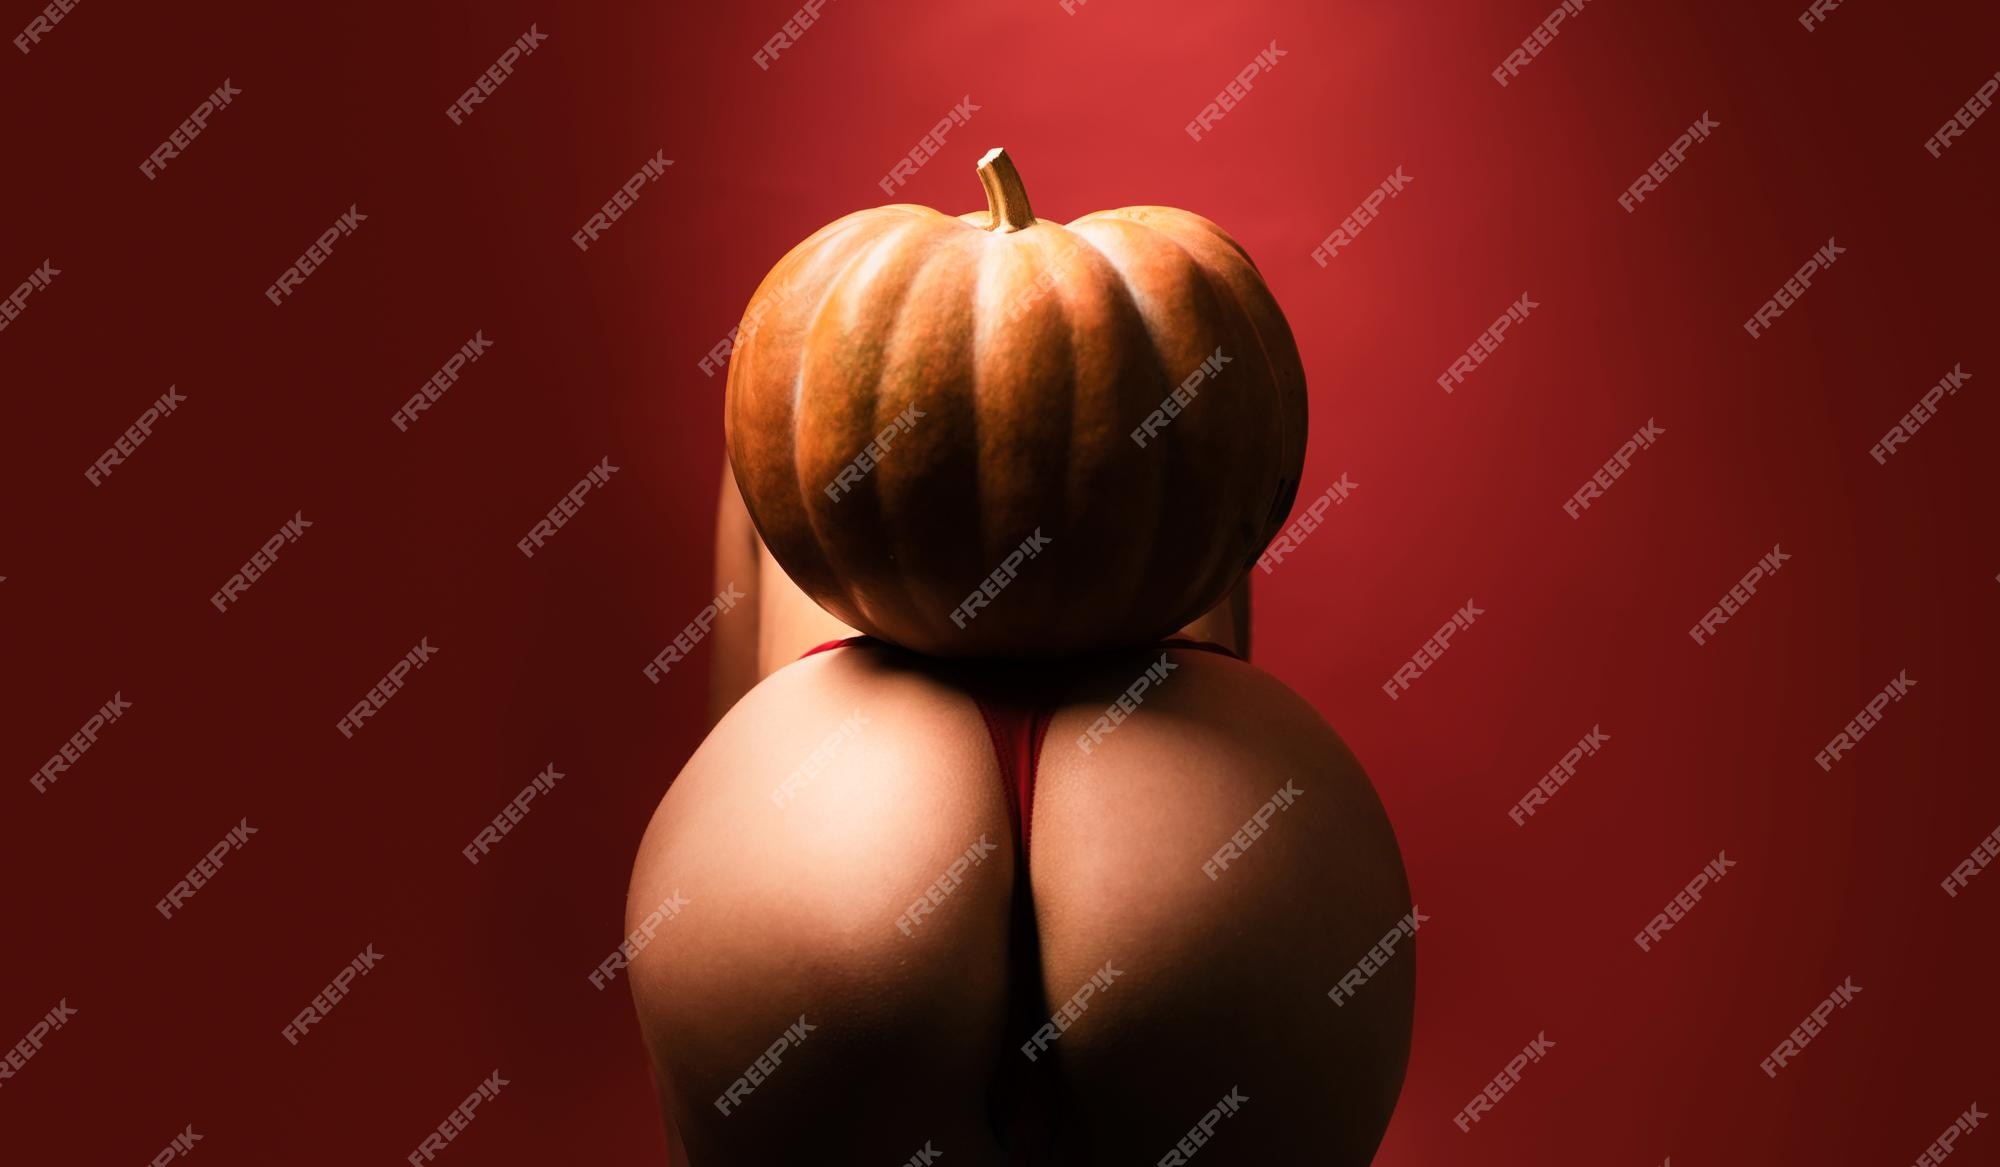 amnon mayer recommends halloween sex pic pic